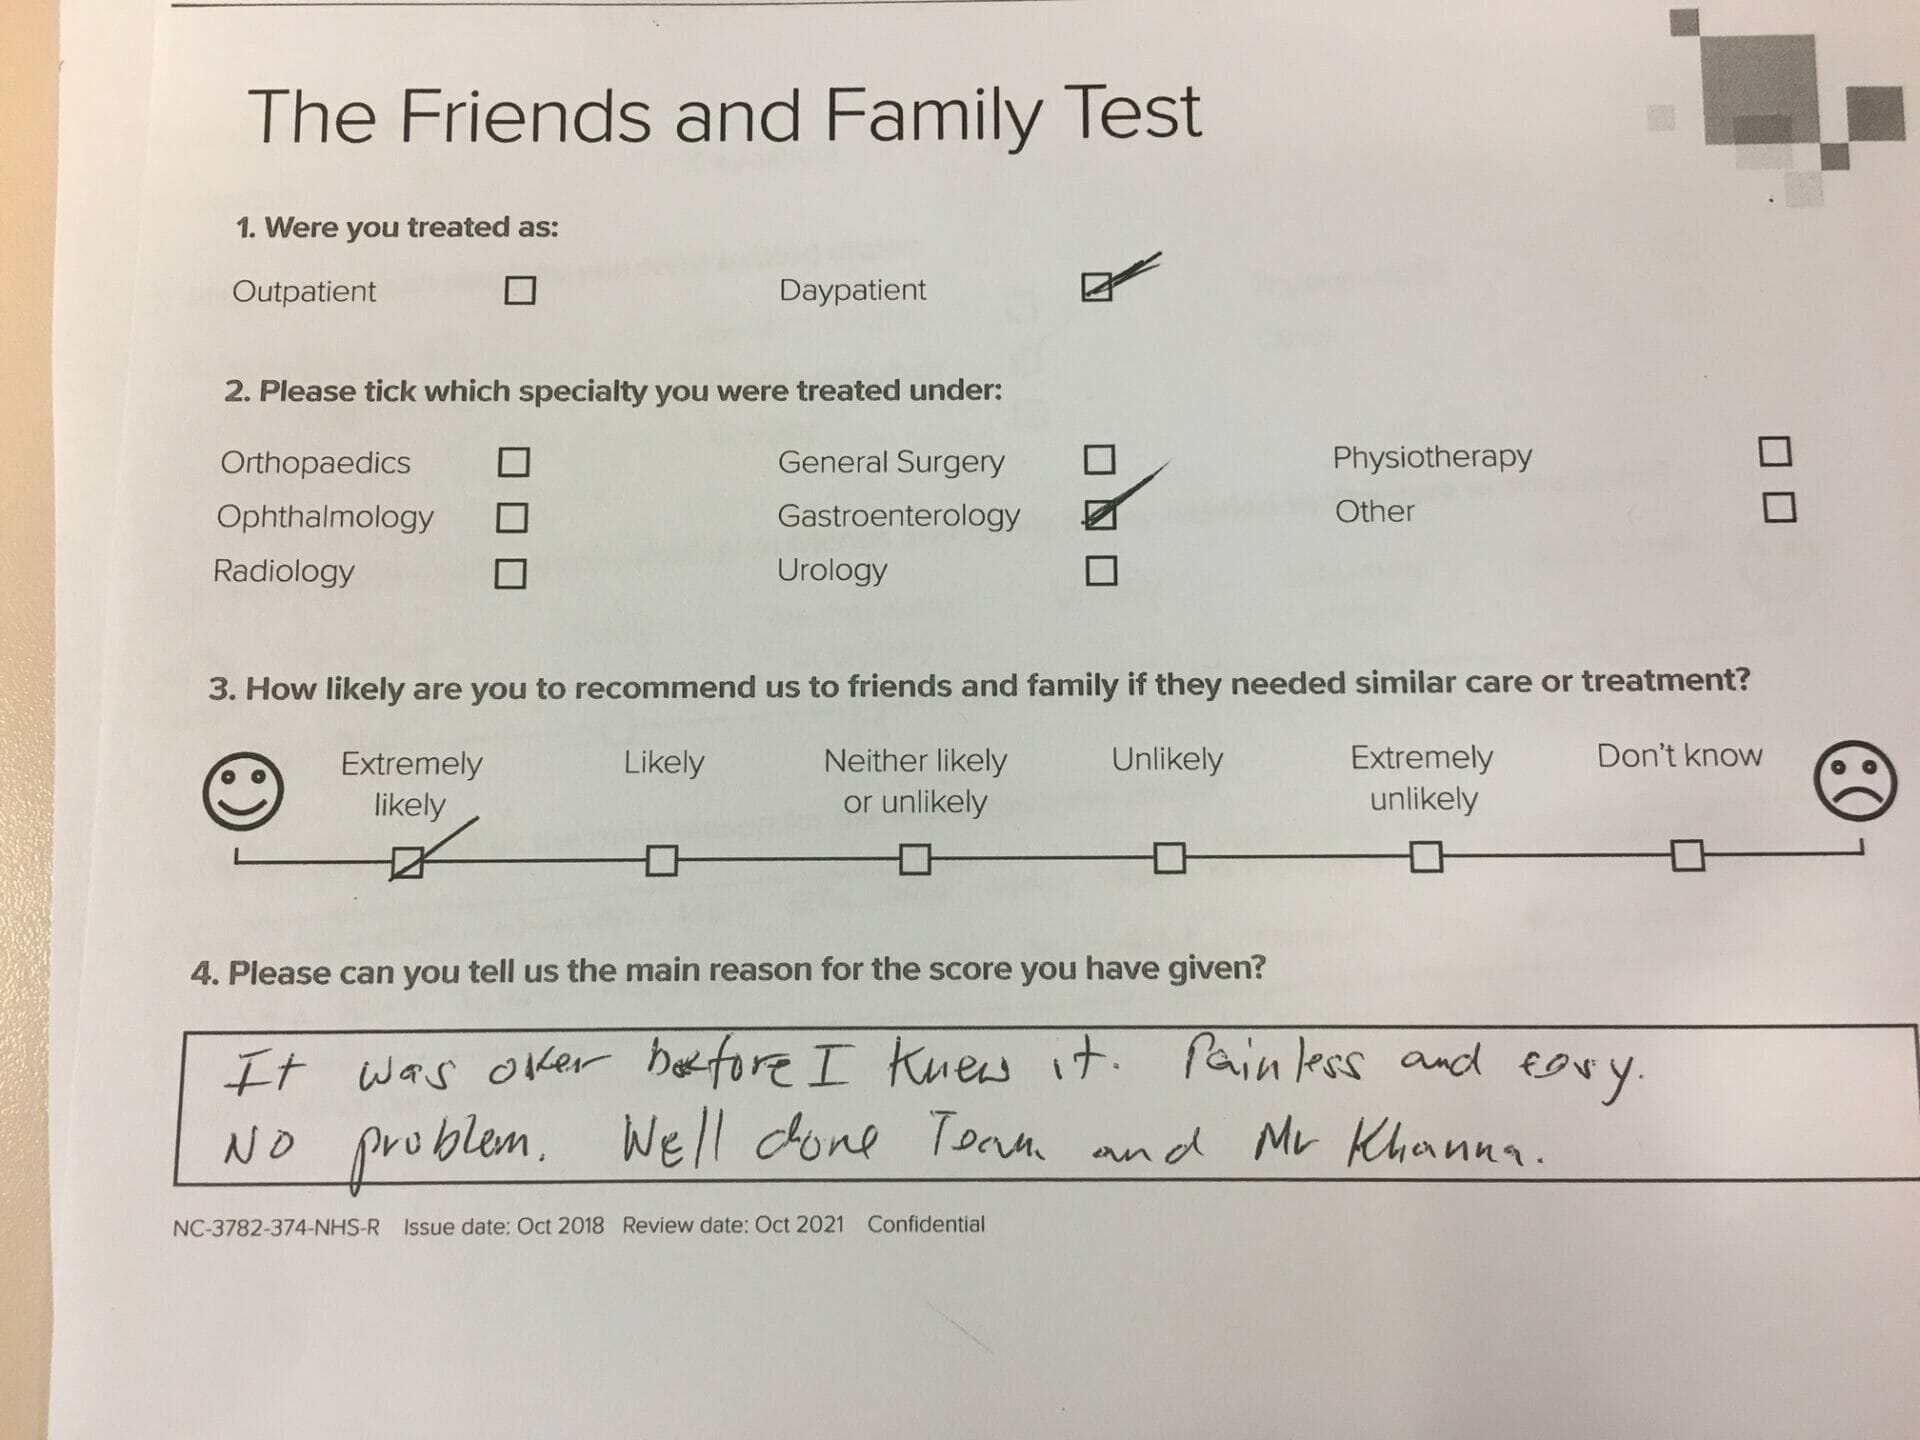 a patient review that talks about how painless and easy the treatment was